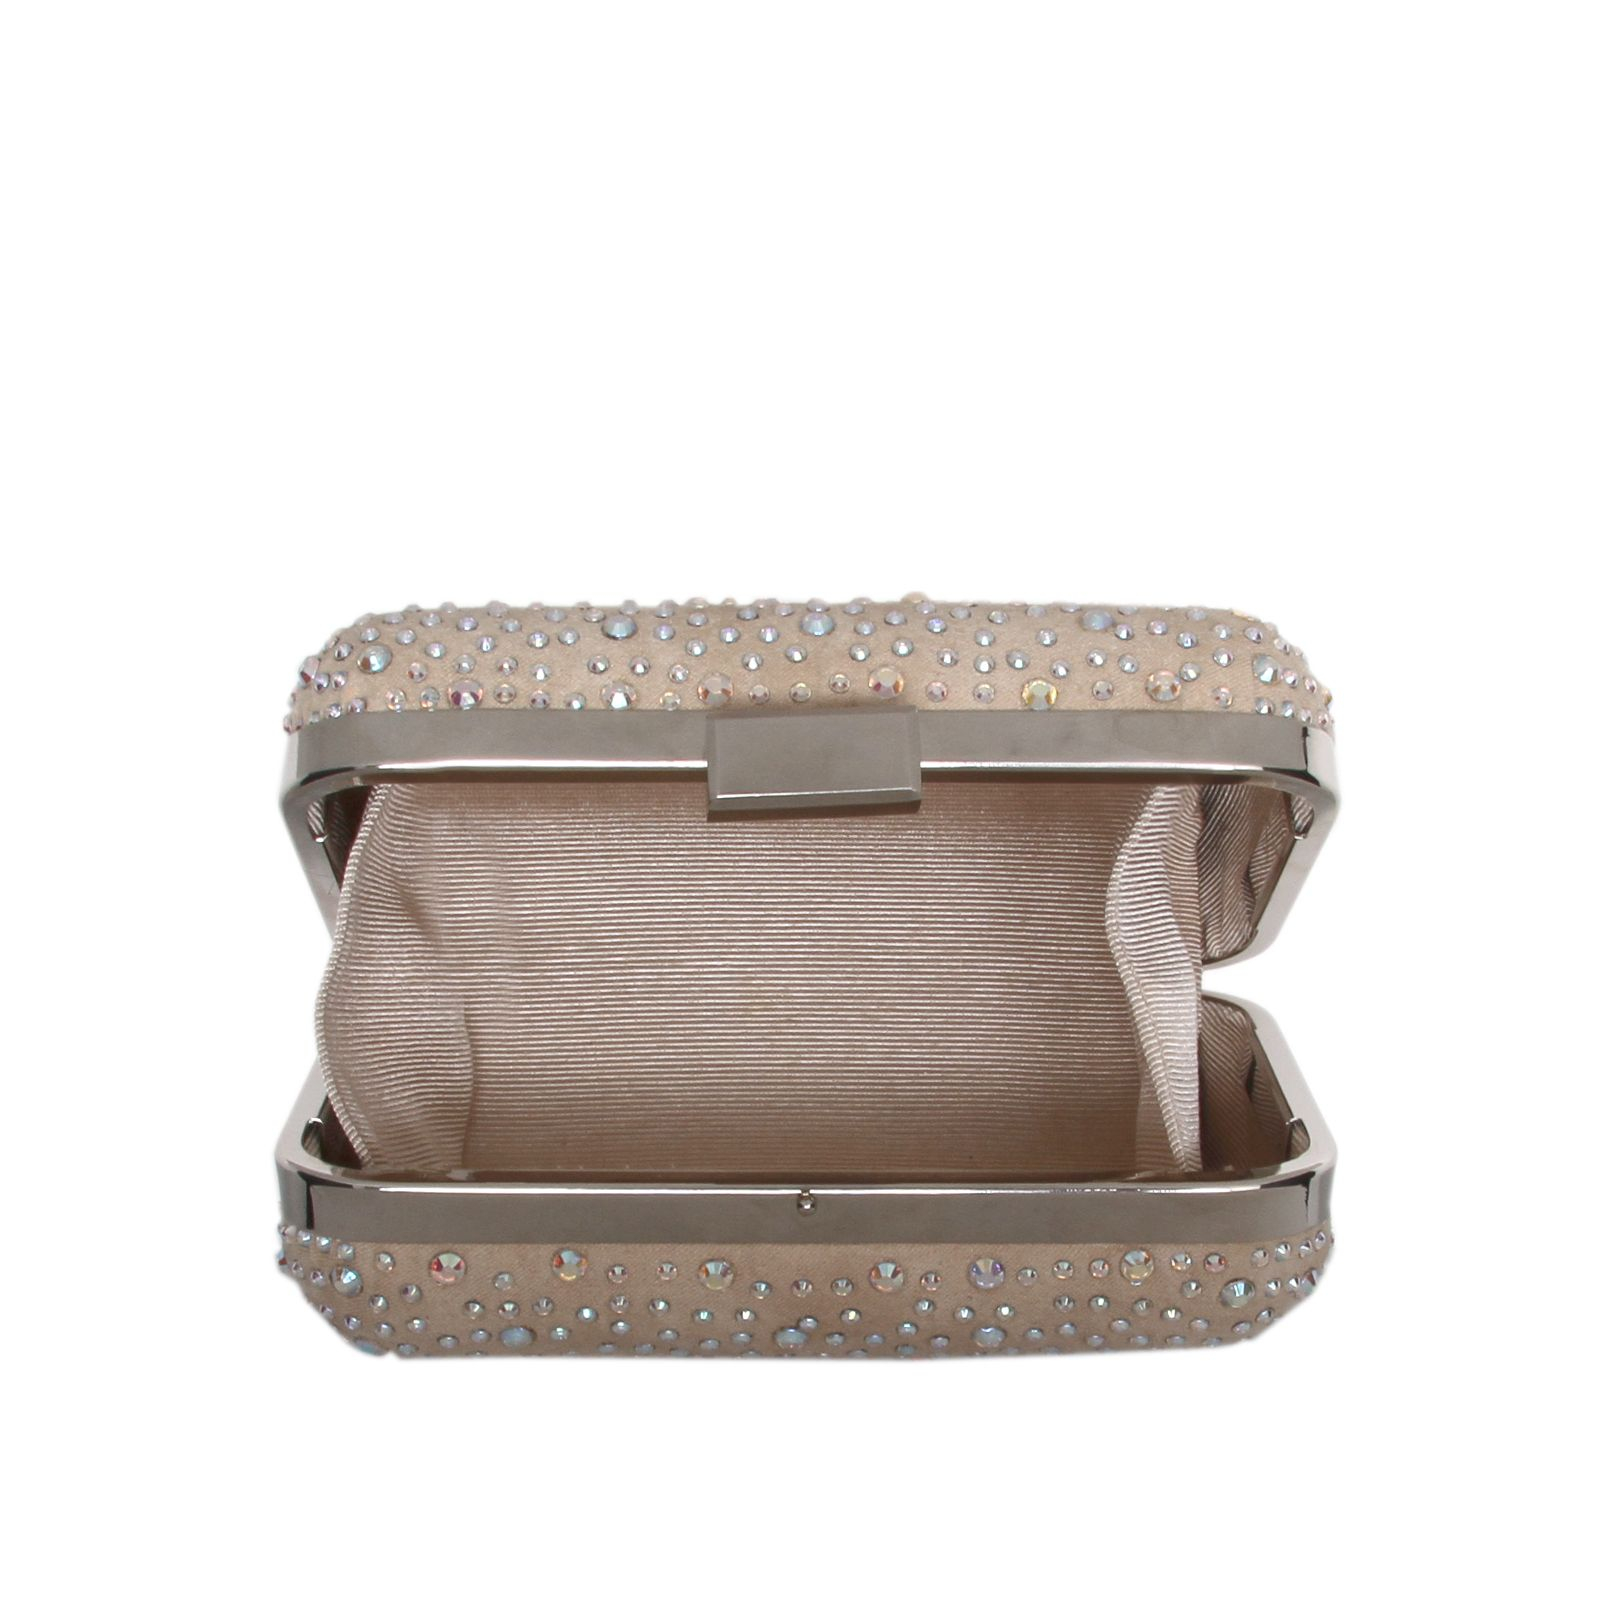 Miss Kg Hetty Clutch Bag in Nude (Natural) - Lyst